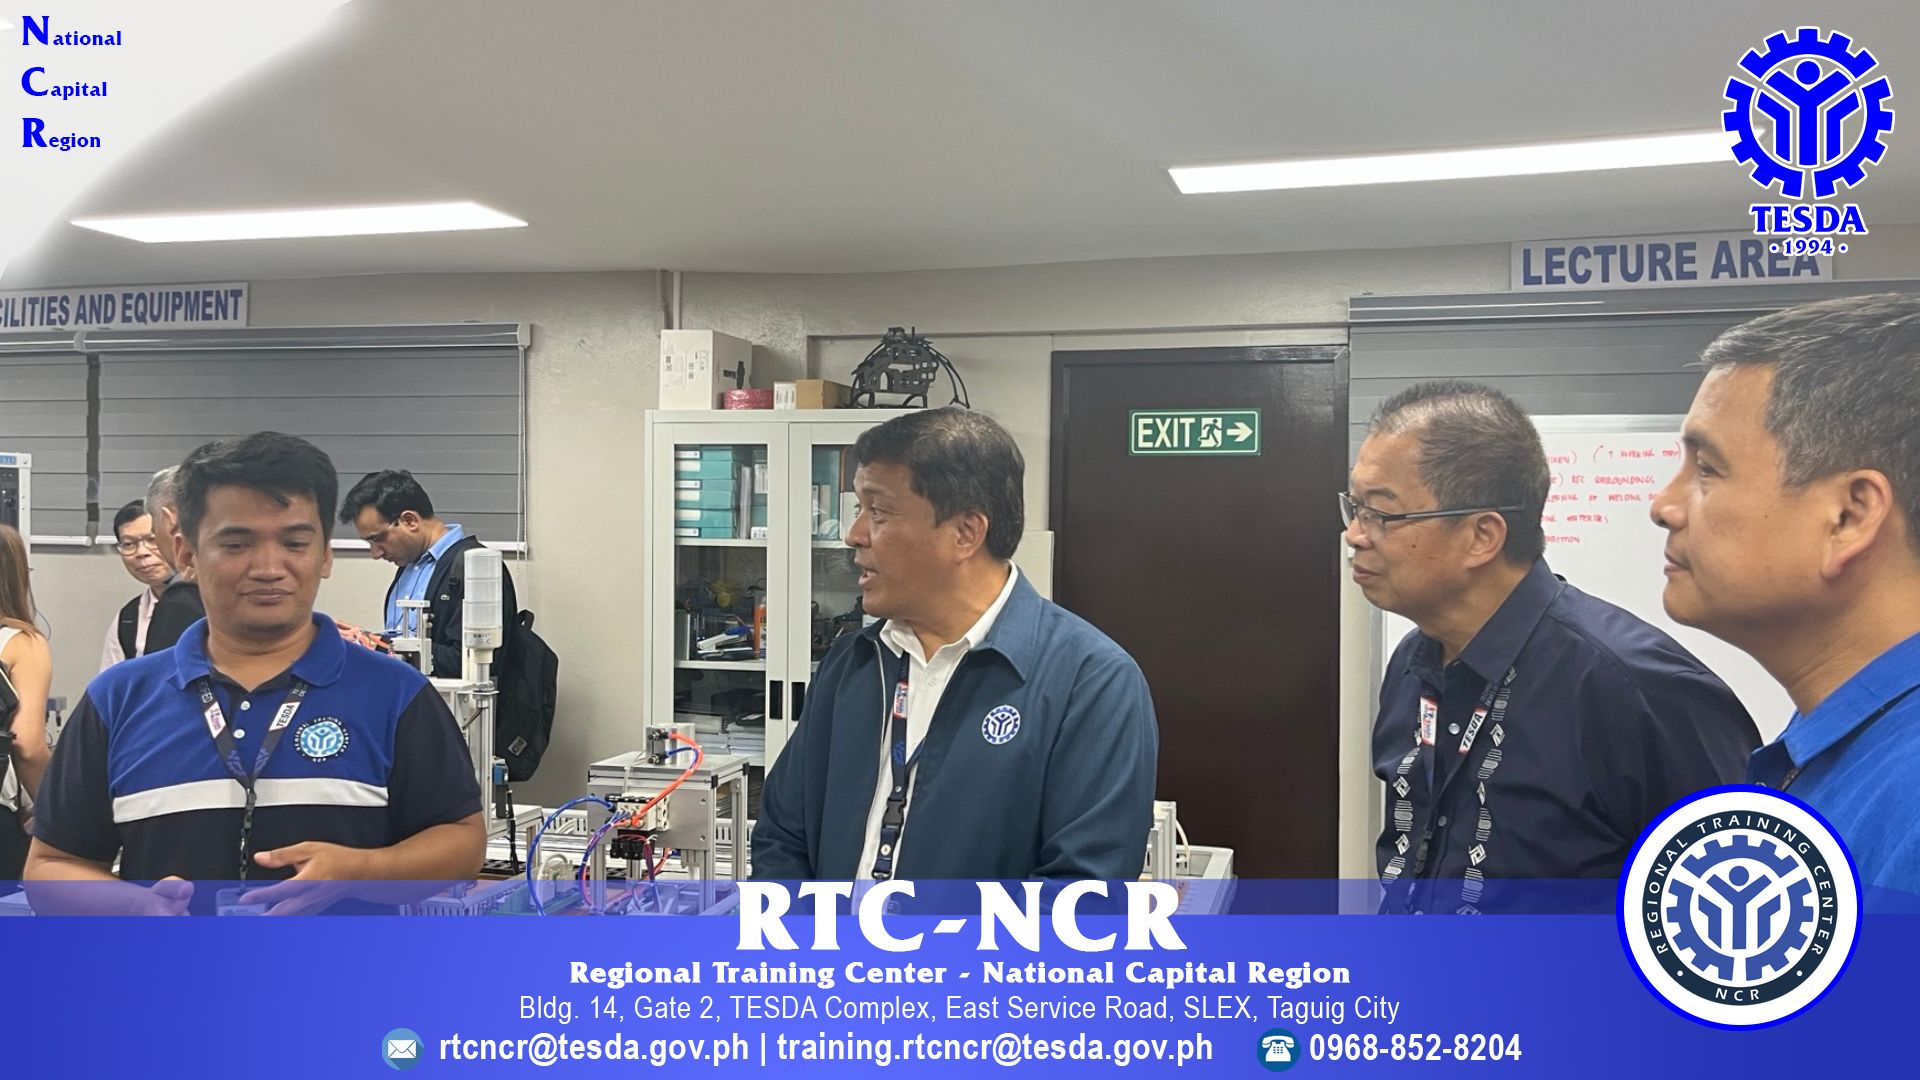 Tour of delegates from Asian Development Bank (ADB) to RTC NCR facilities took place on Feb 7, 2023, at the RTC-NCR Mechatronics Laboratory Room.